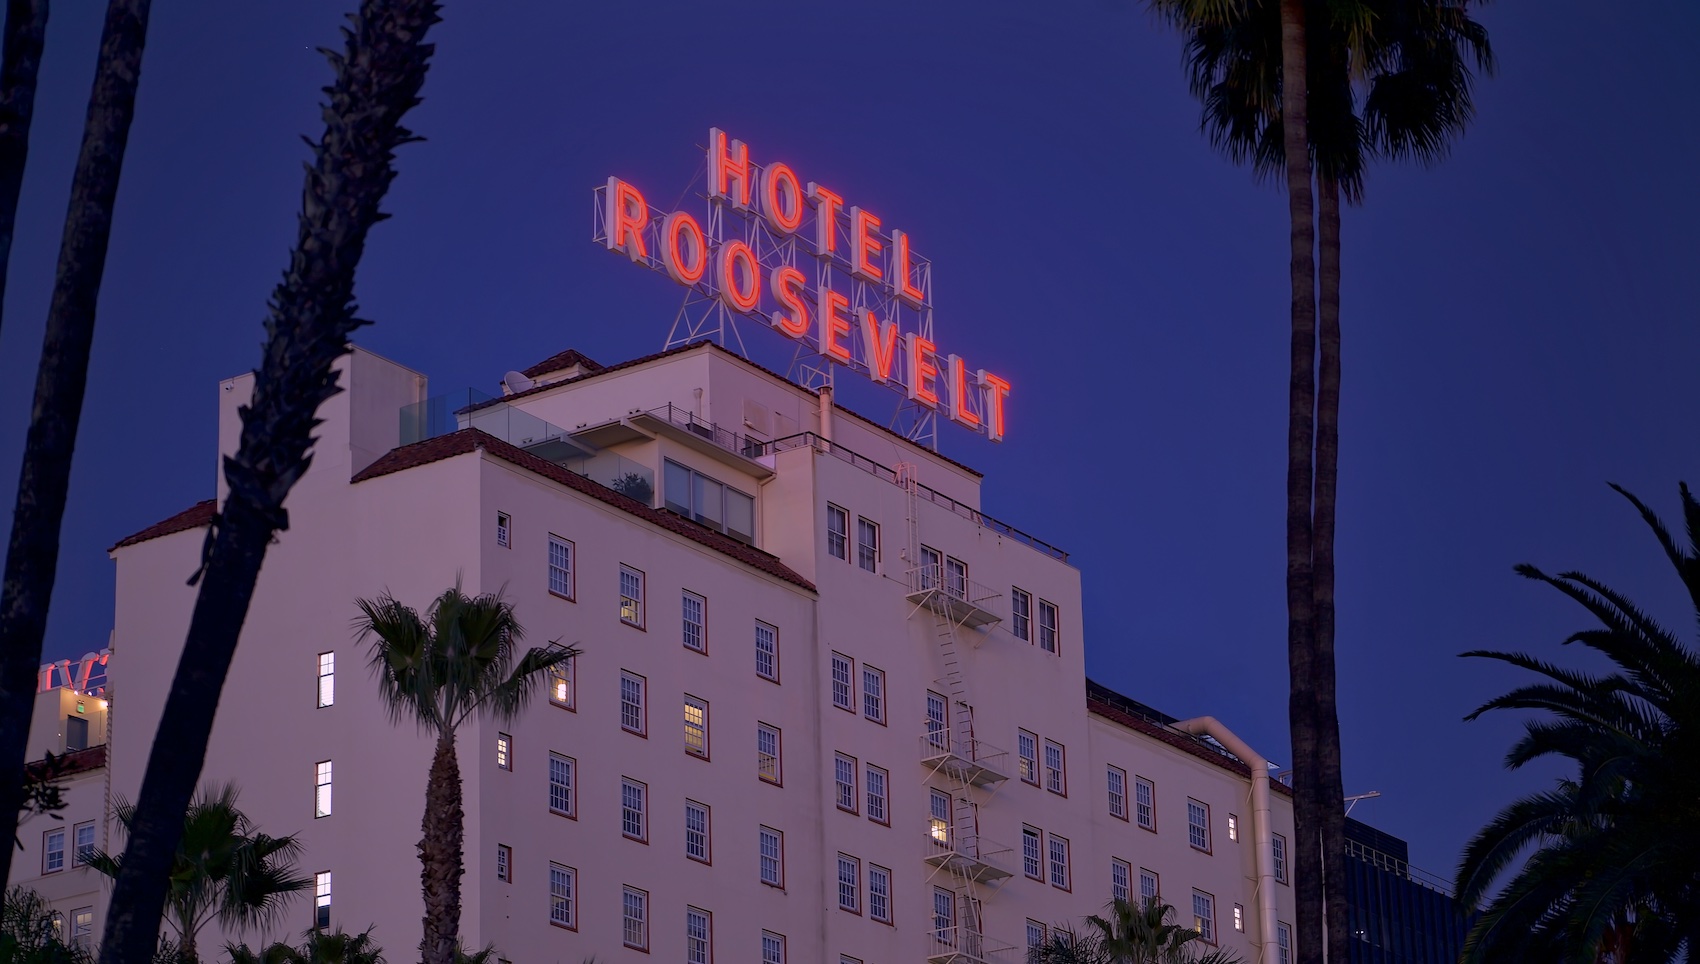 The Hollywood Roosevelt Hotel Los Angeles